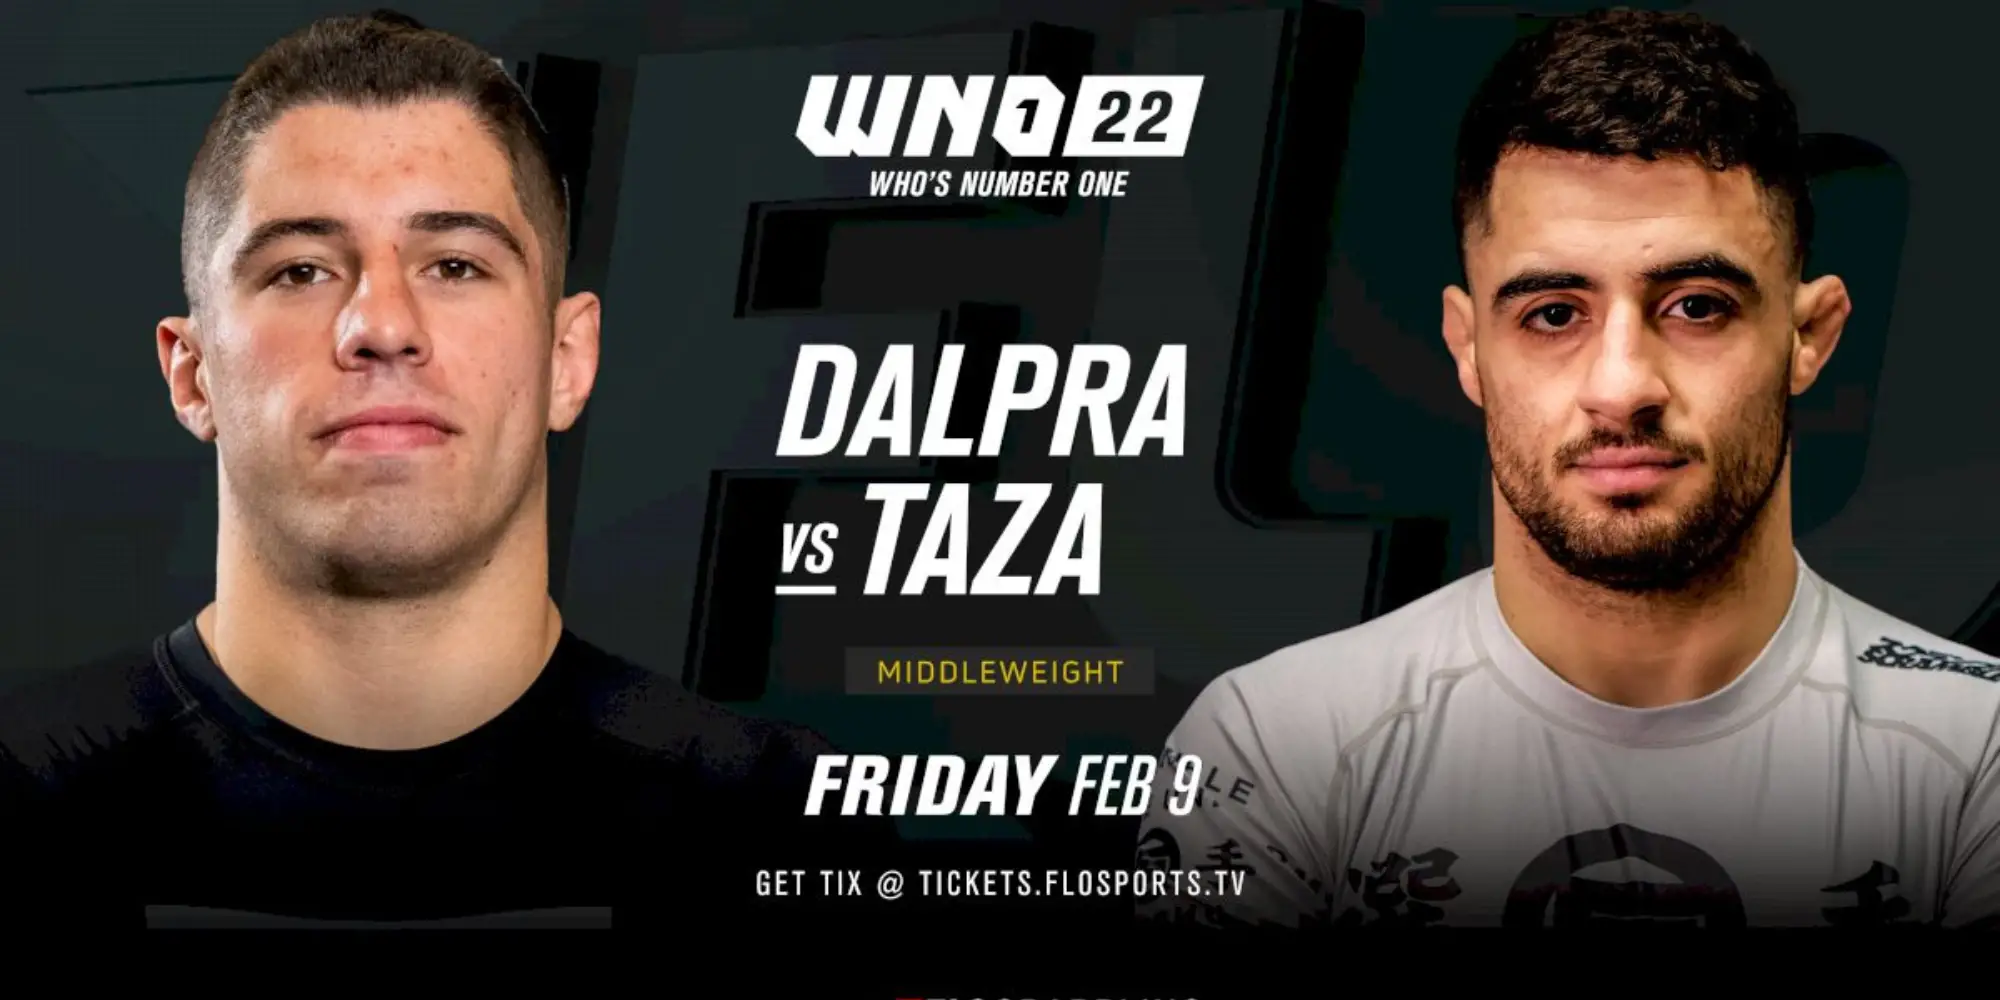 Tainan Dalpra To Face Oliver Taza At Who's Number One 22